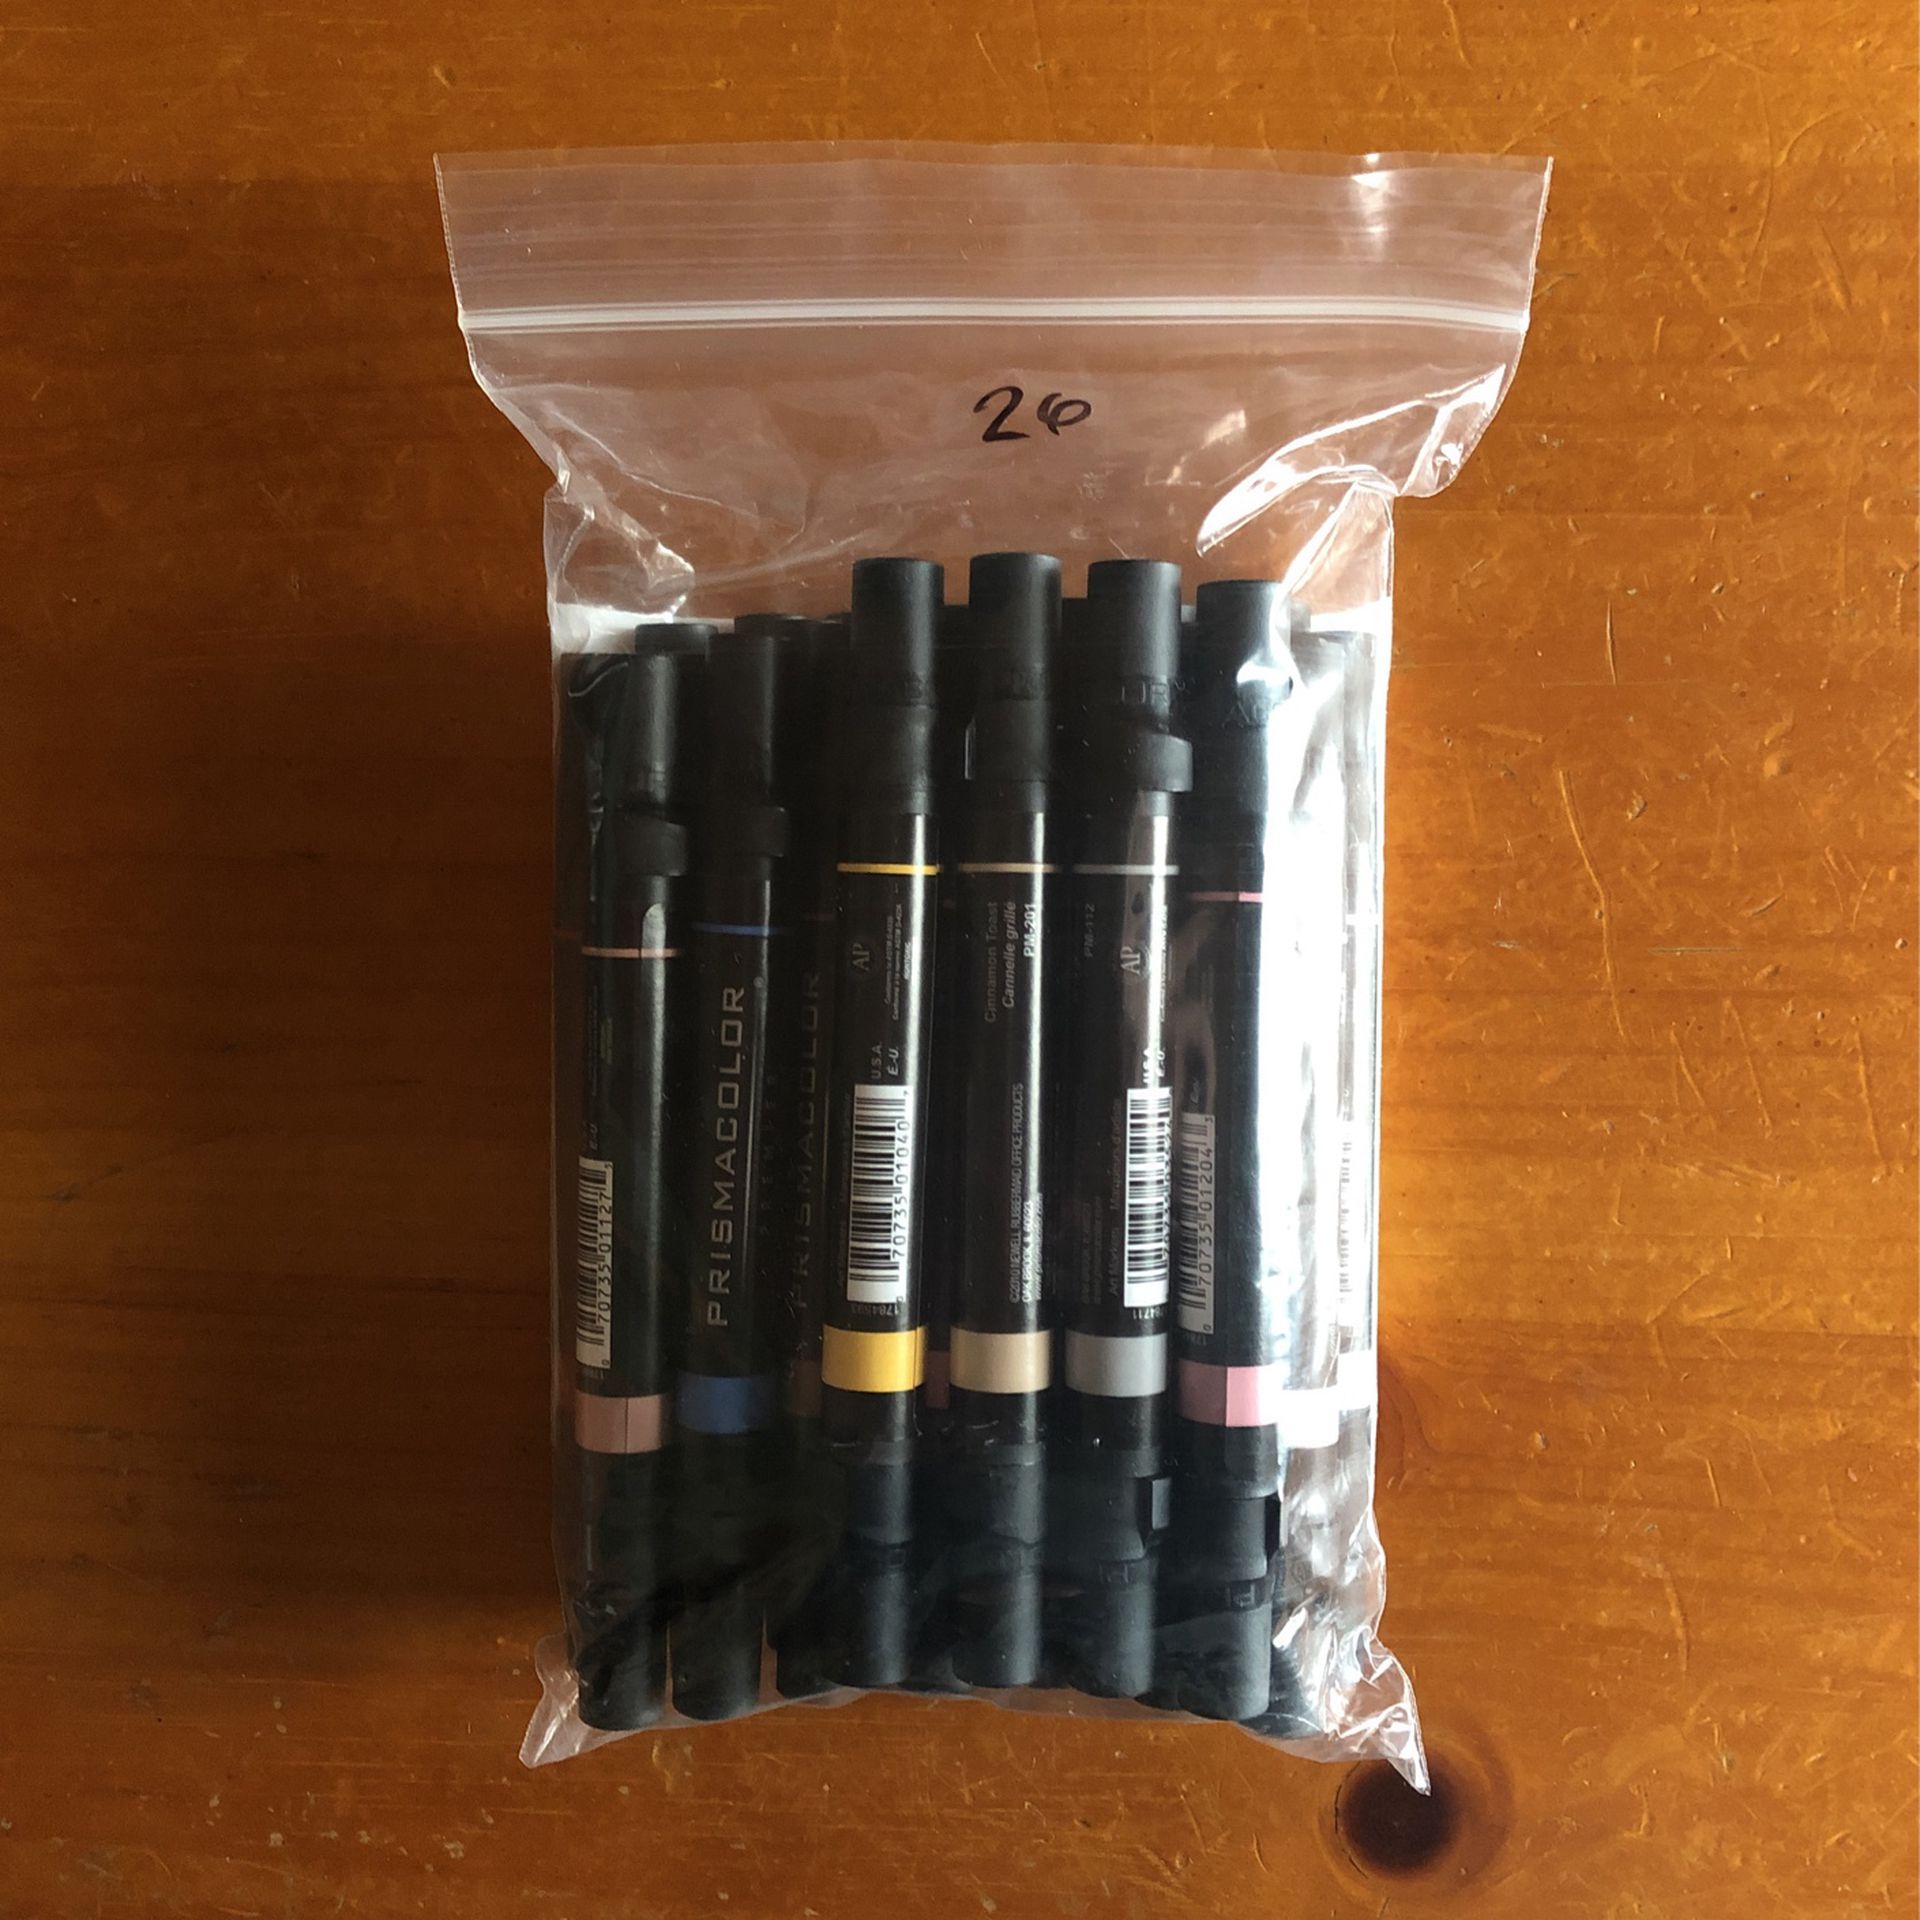 26 Double-Ended Prismacolor Markers